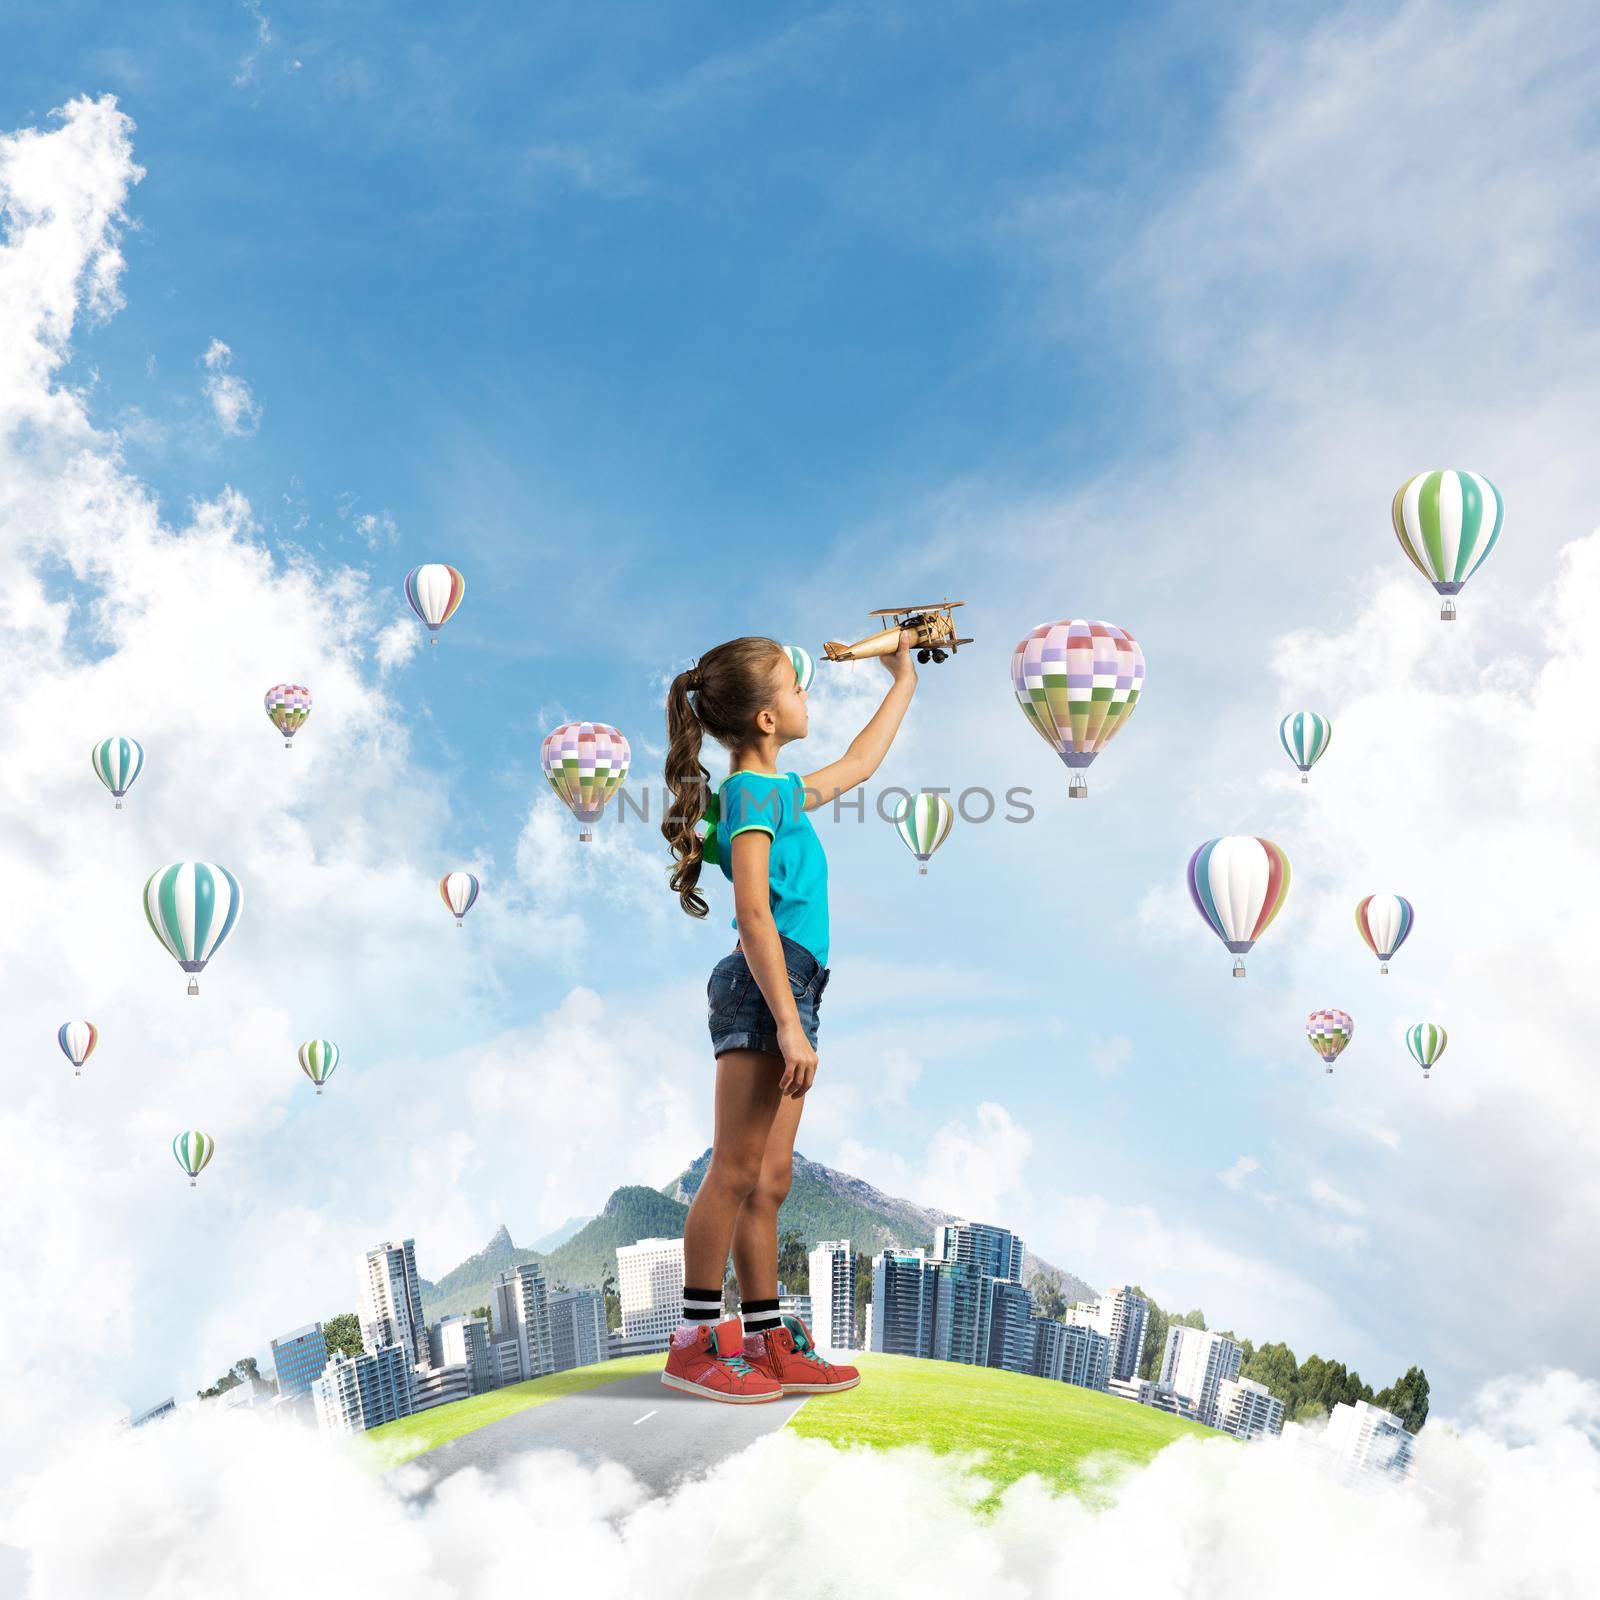 Cute kid girl on city floating island playing with retro plane model